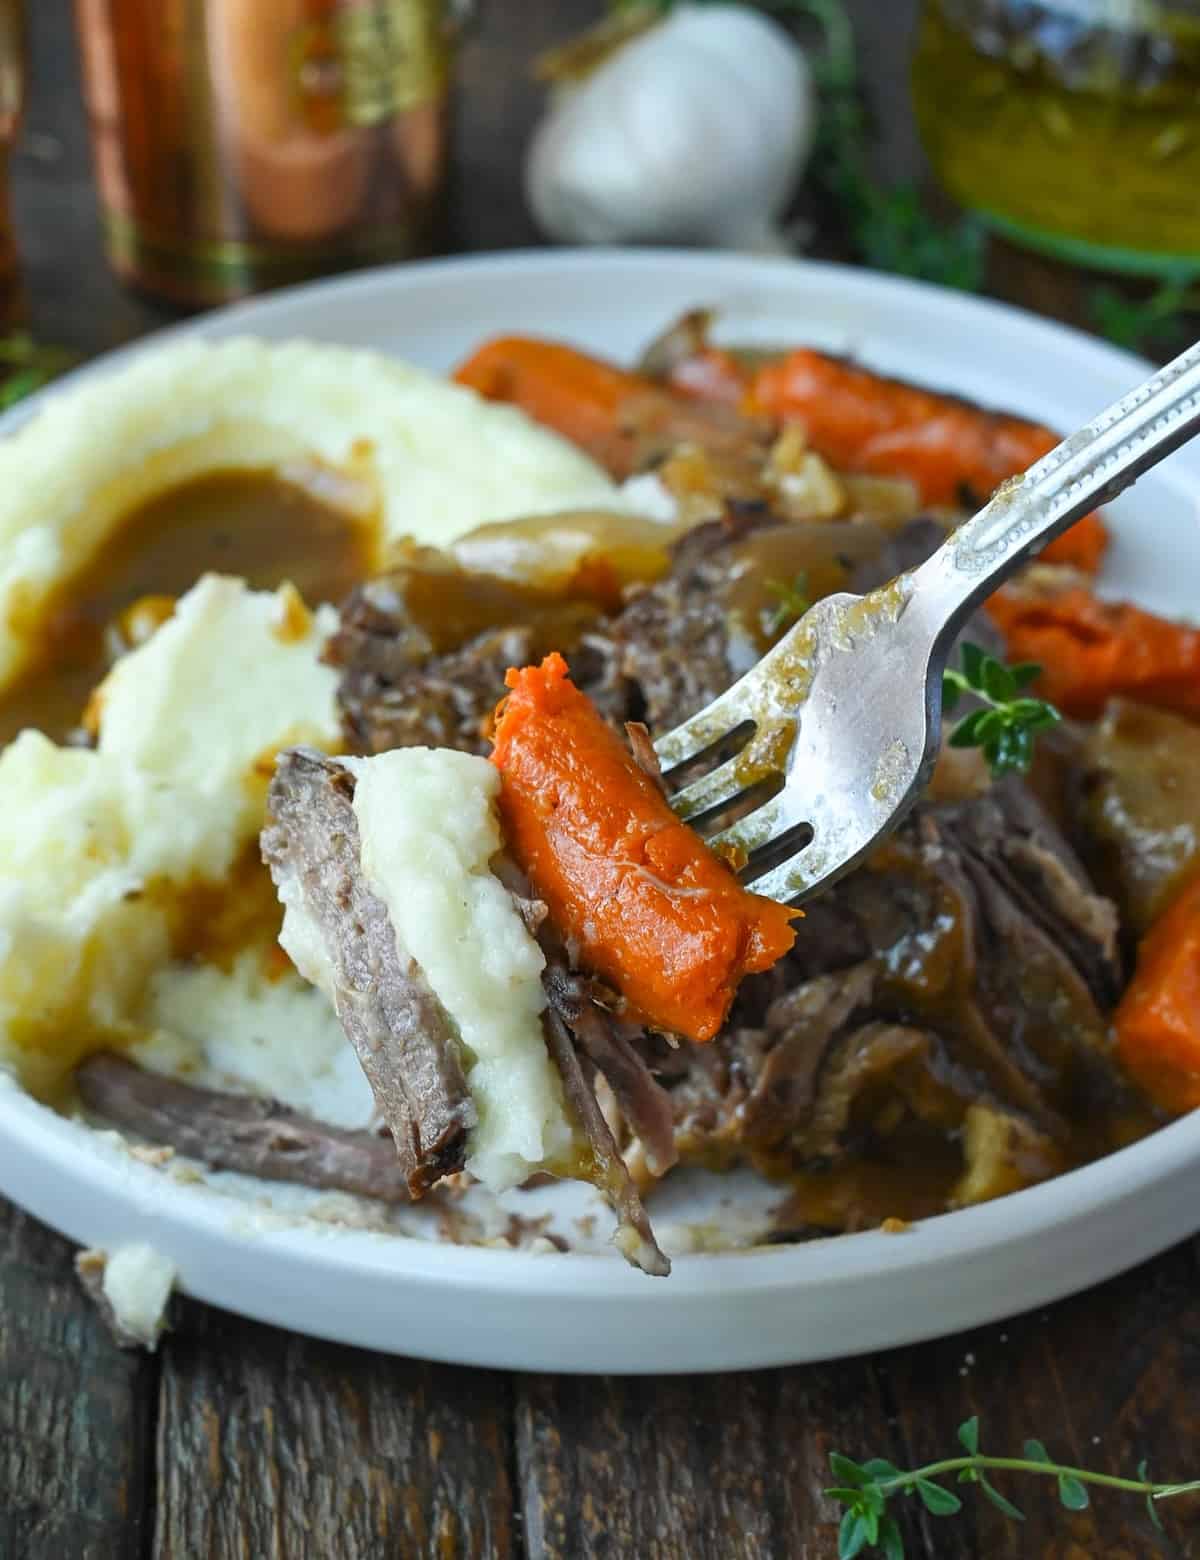 Slow cooker pot roasr with carrots and mashed potatoes on a white plate.